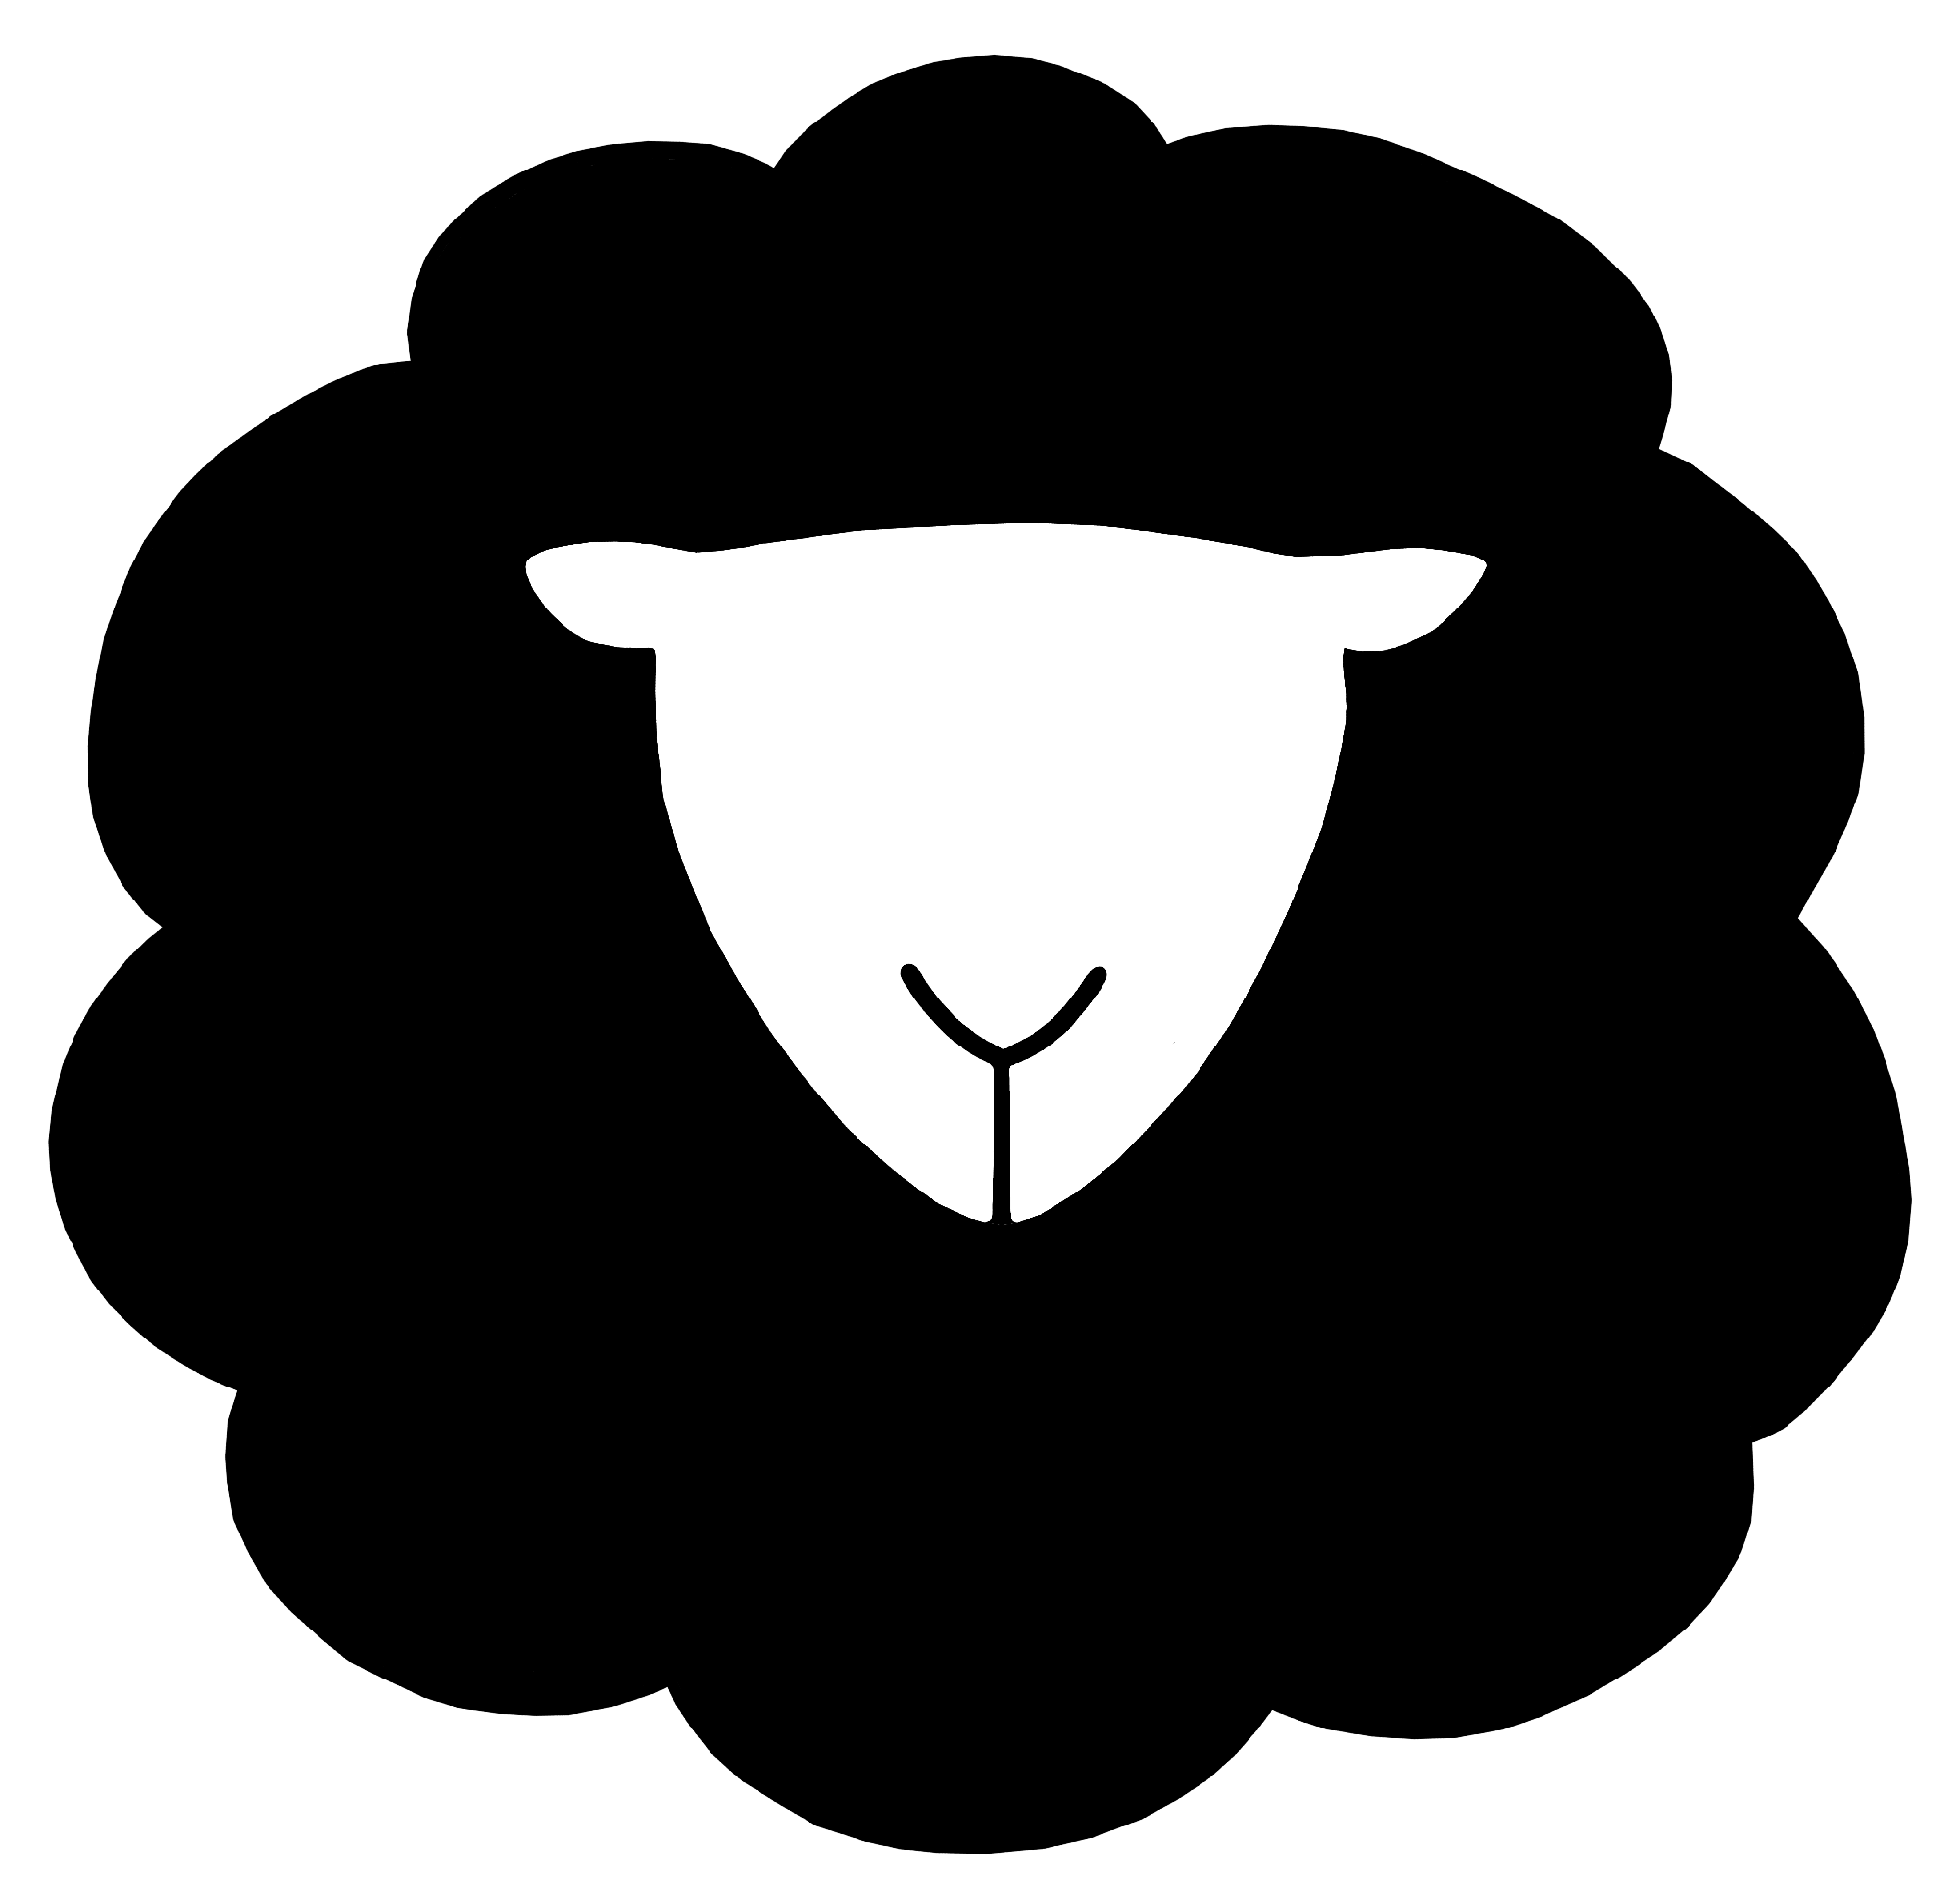 image of a black sheep with a white head